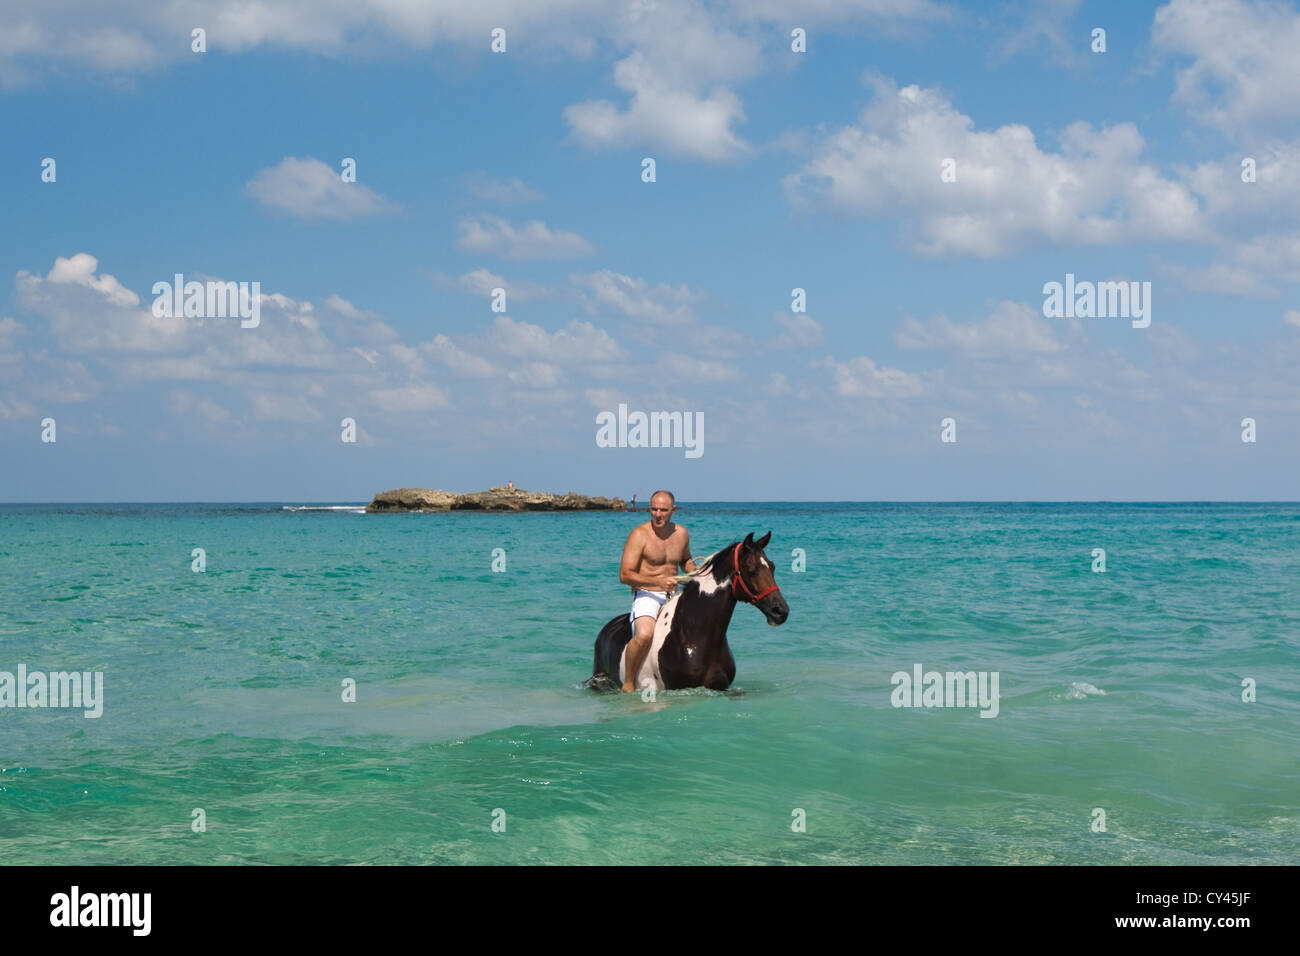 Man Washes his horse in the Mediterranean Sea Stock Photo